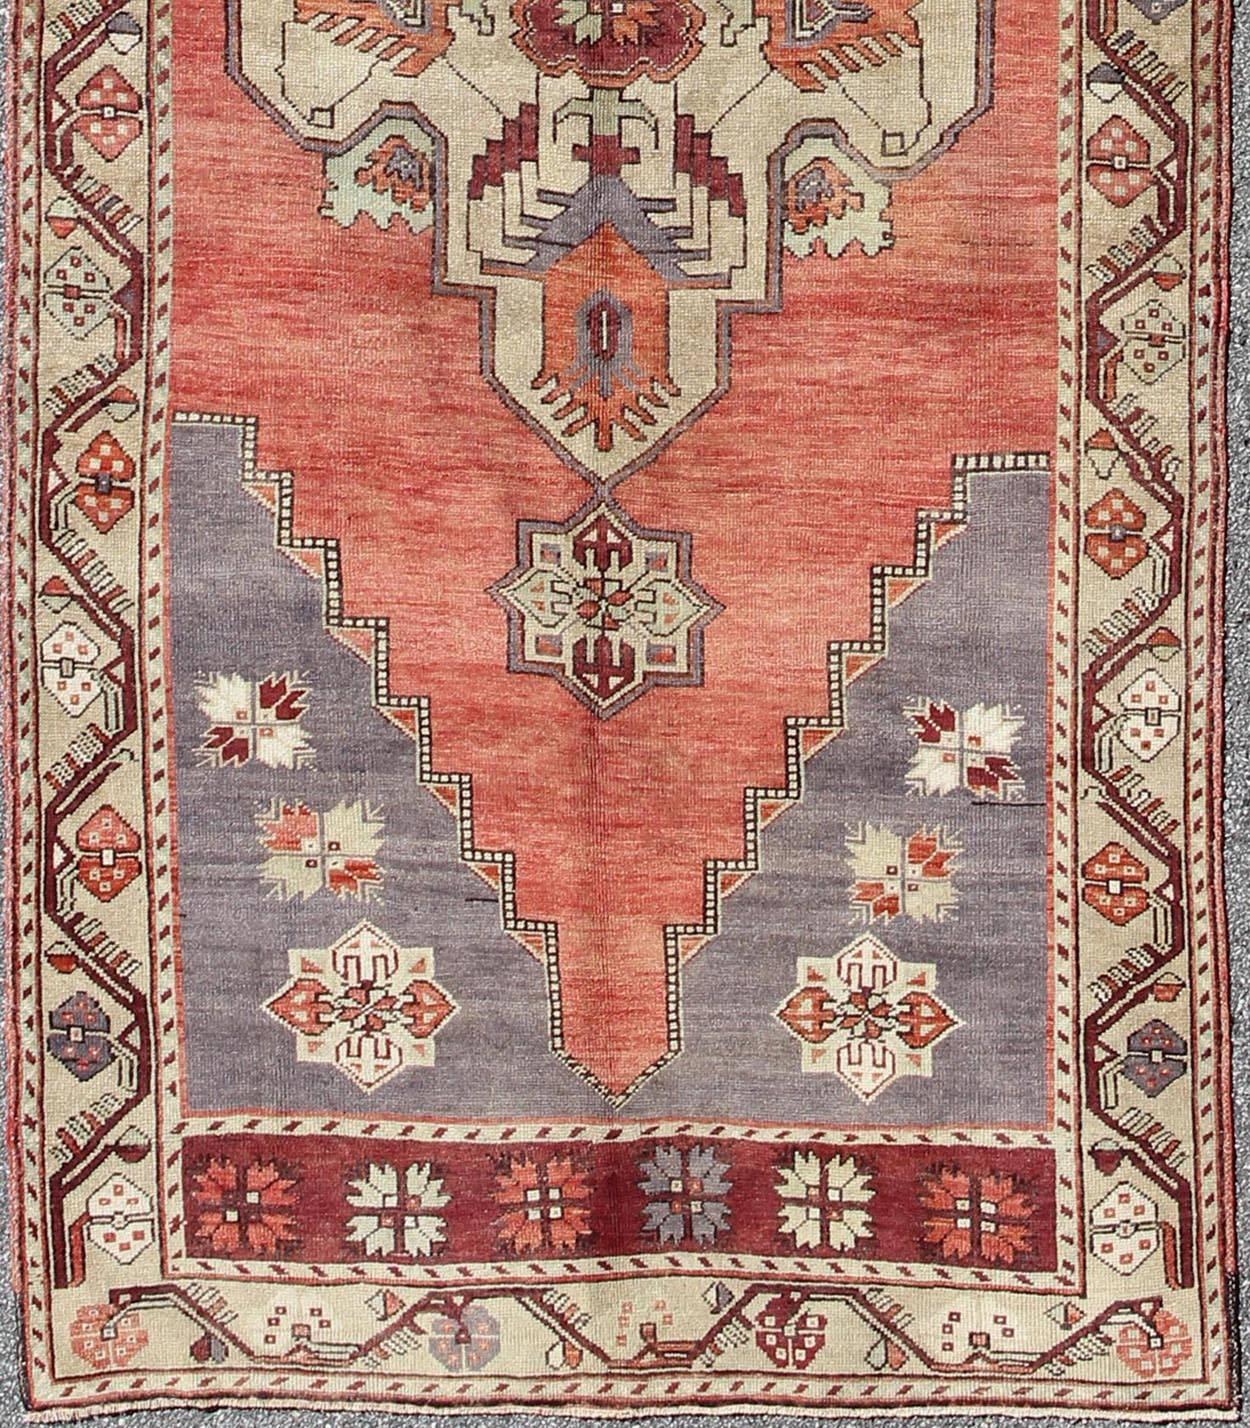   Vintage Turkish Oushak Gallery runner with geometric dual medallions in red, gray, ivory, rug Keivan Woven Arts/ rug/ TU-TRS-34561, country of origin / type: Turkey / Oushak, circa 1940

Measures: 4'11 x 14'7. 

This Turkish gallery runner